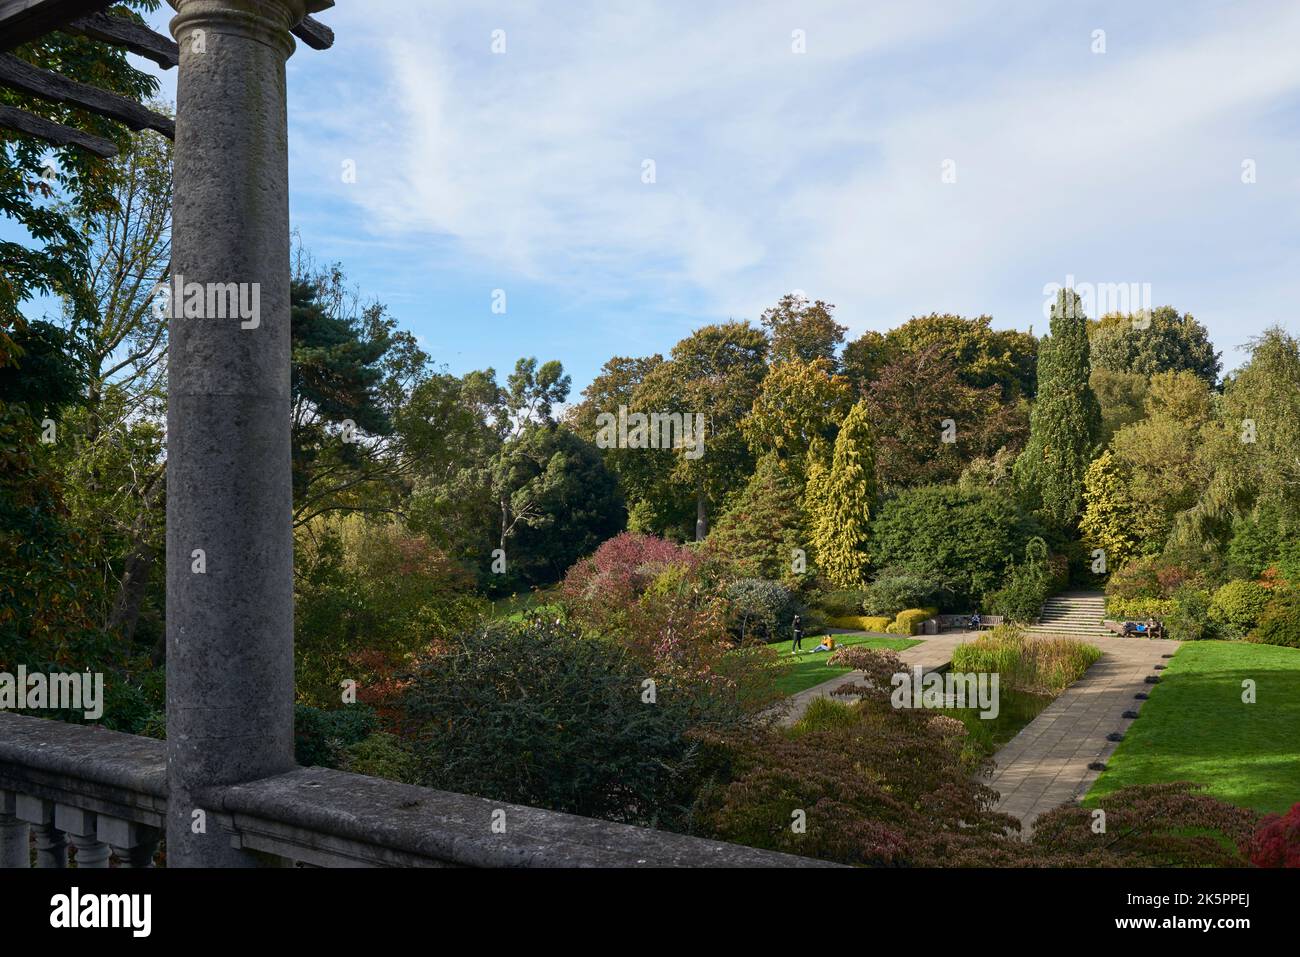 The Hill Gardens on Hampstead Heath, North London UK, viewed from the Pergola Stock Photo